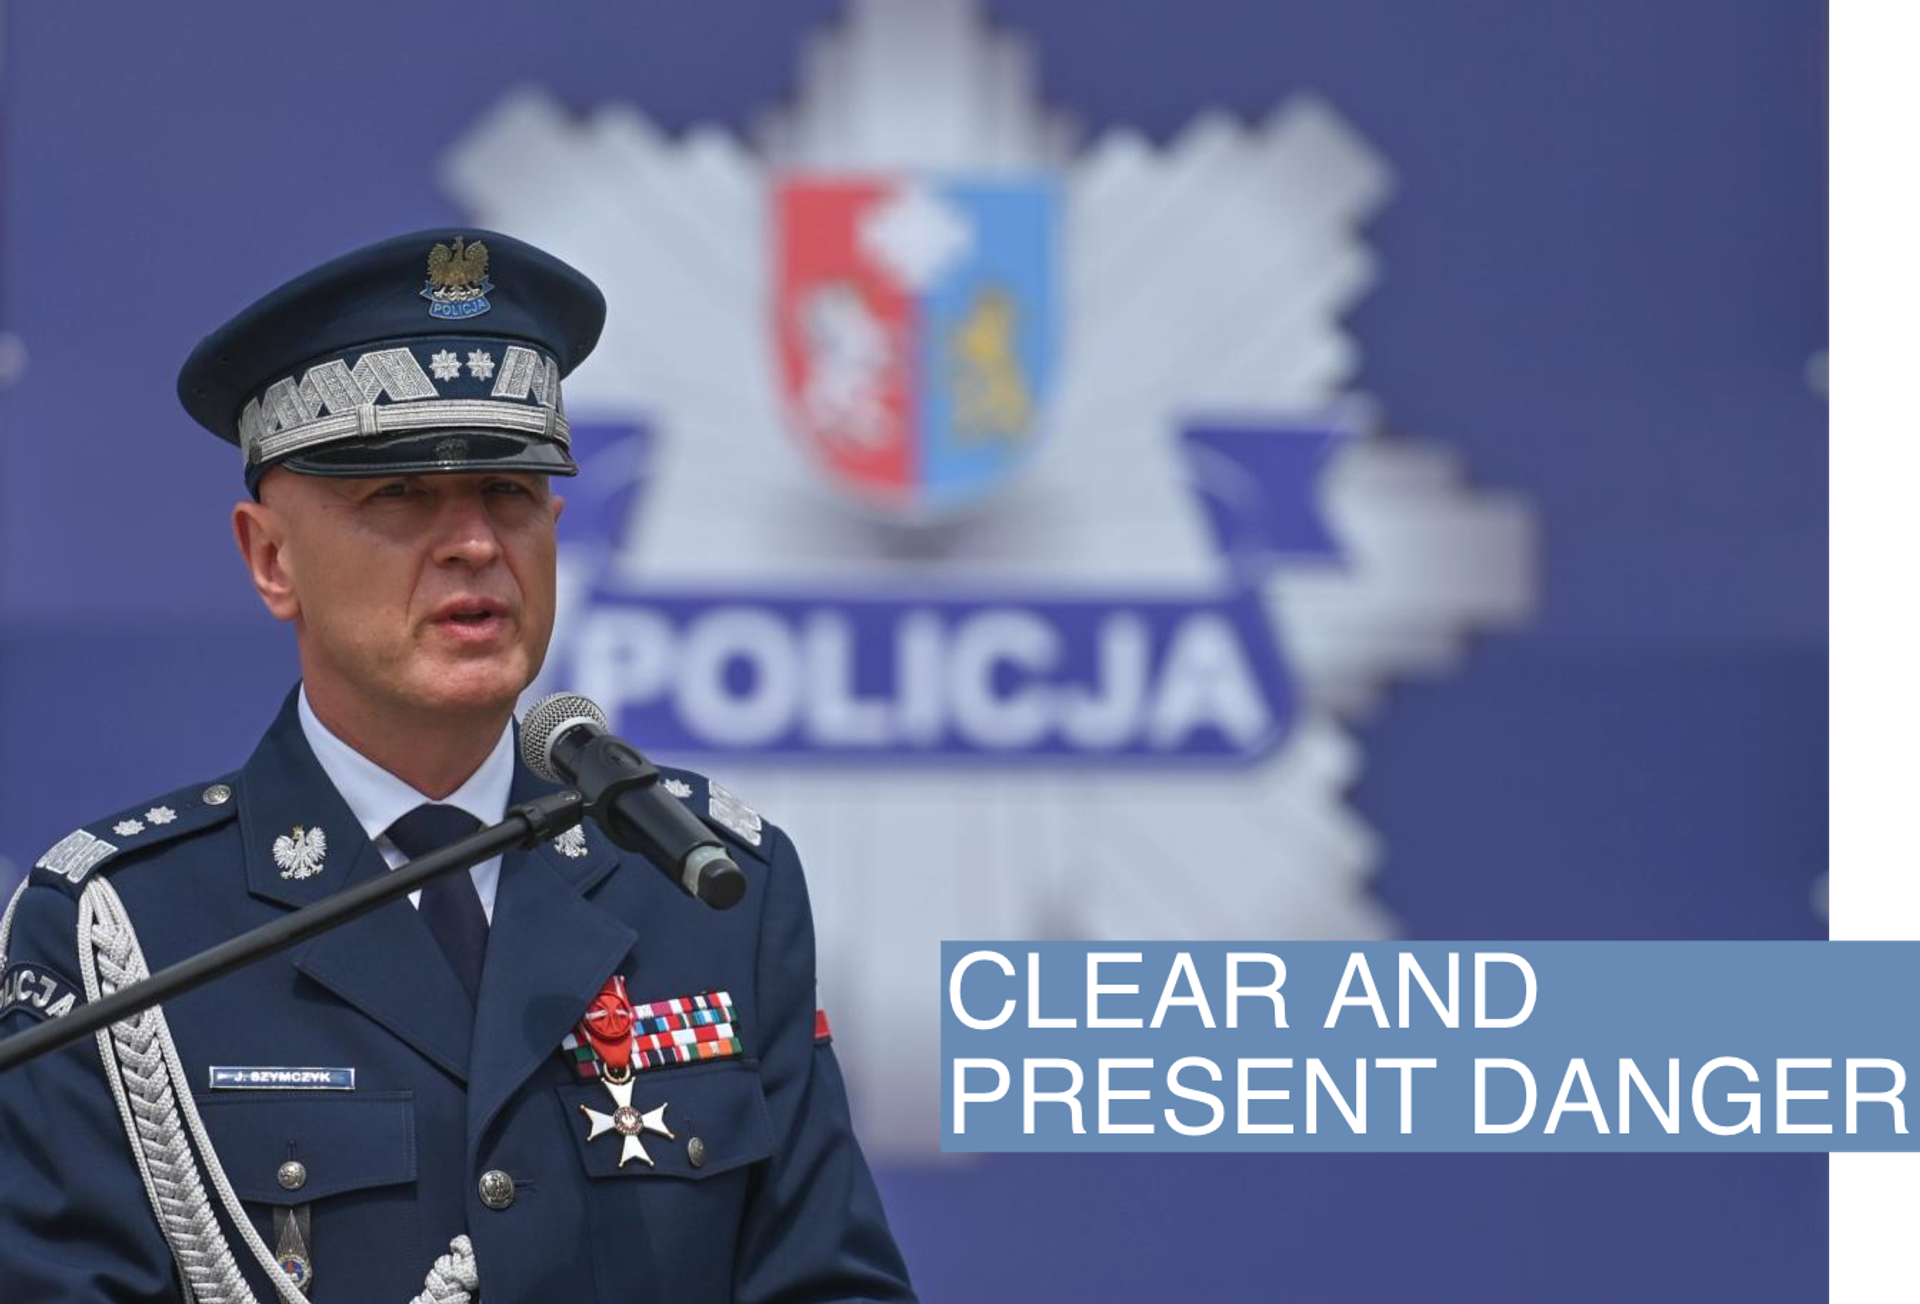 Police Commander in Chief, Inspector General of Polish Police, Jaroslaw Szymczyk, during the celebration of the Police Day in Podkarpackie Voivodeship (Subcarpathia Province) held in Rzeszow.